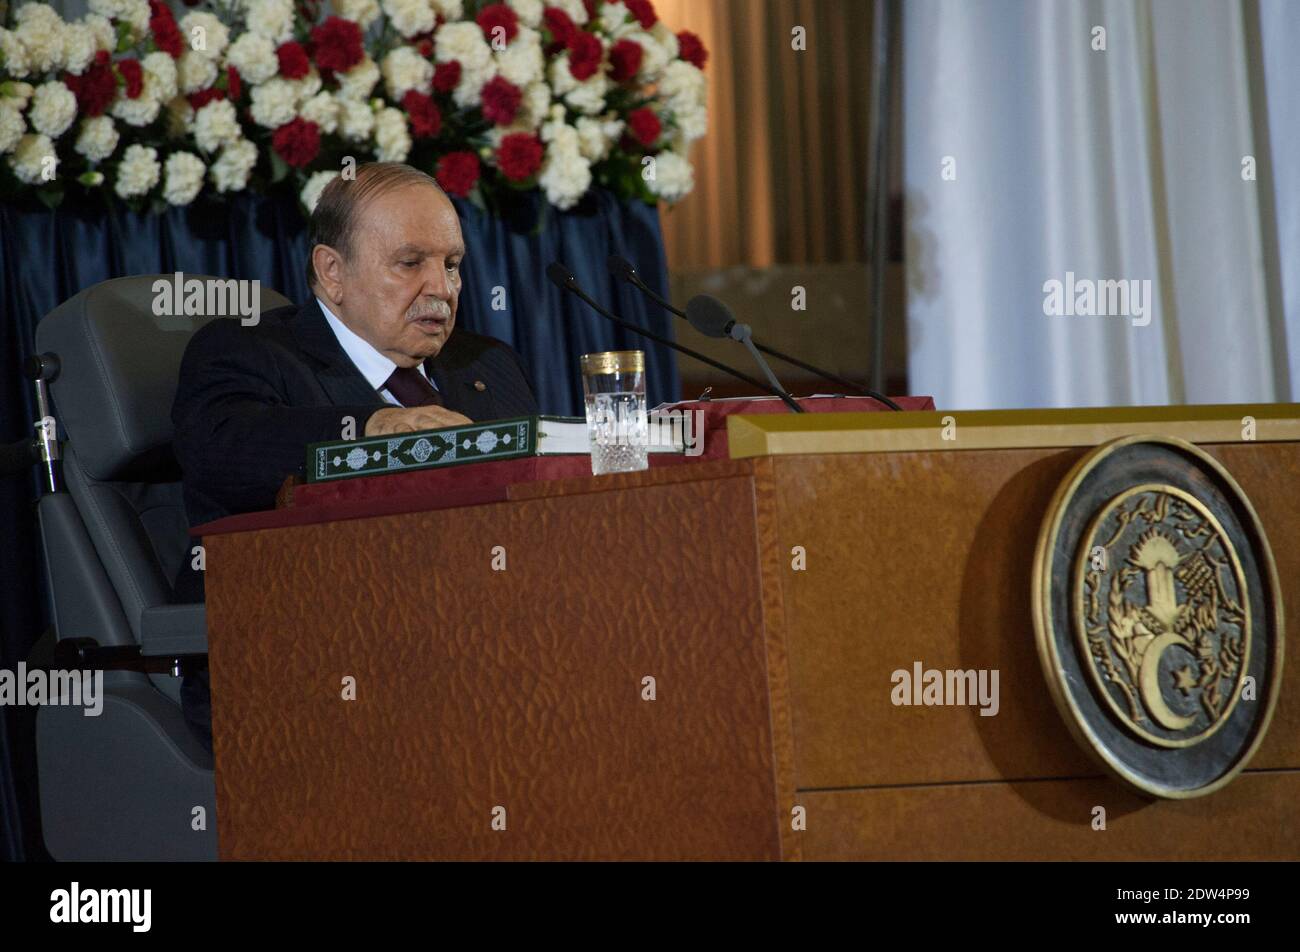 Algerian President Abdulaziz Bouteflika sits in his wheelchair on stage during his inauguration ceremony as he is sworn as Algeria's President for a fourth term in Algiers, Algeria, on April 28, 2014. Official results showed that Bouteflika won 81.5 percent of the votes in an election marred by low turnout and claims of fraud by his opponents, including main rival Ali Benflis, who received just 12.18 percent. Photo by Ammi Louiza/ABACAPRESS.COM Stock Photo